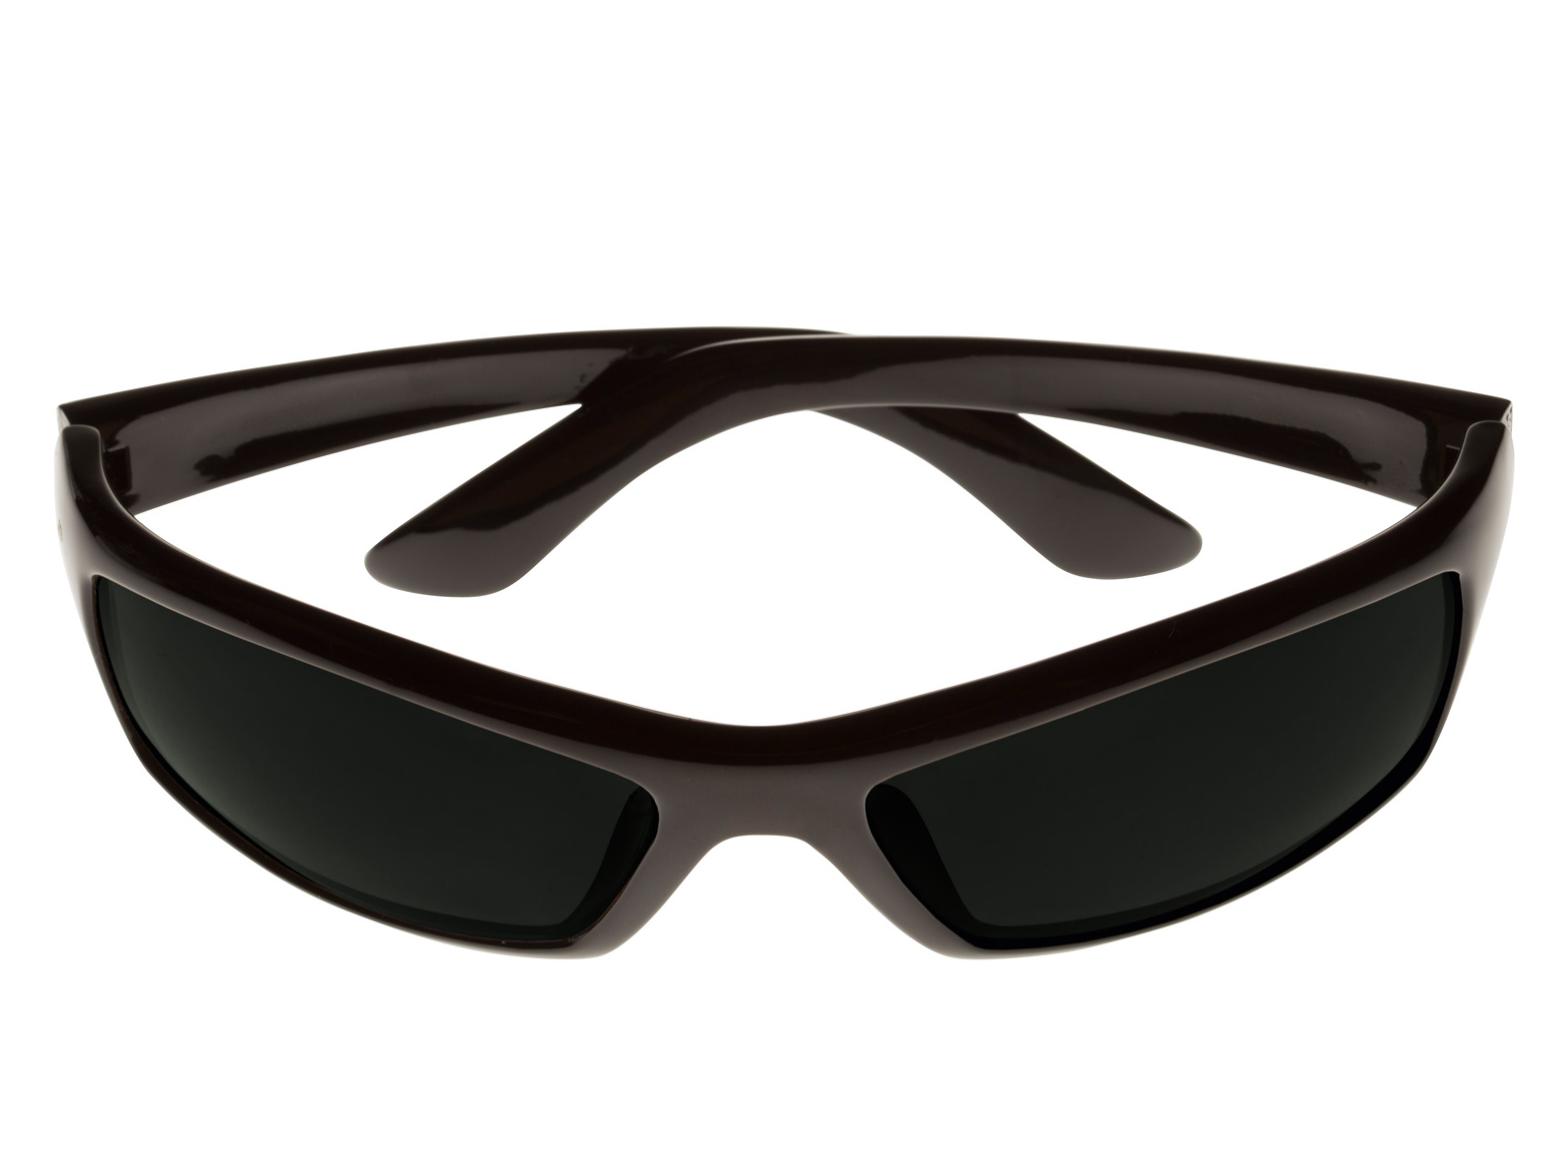 Sunglasses for up in the mountains (extreme light intensity)